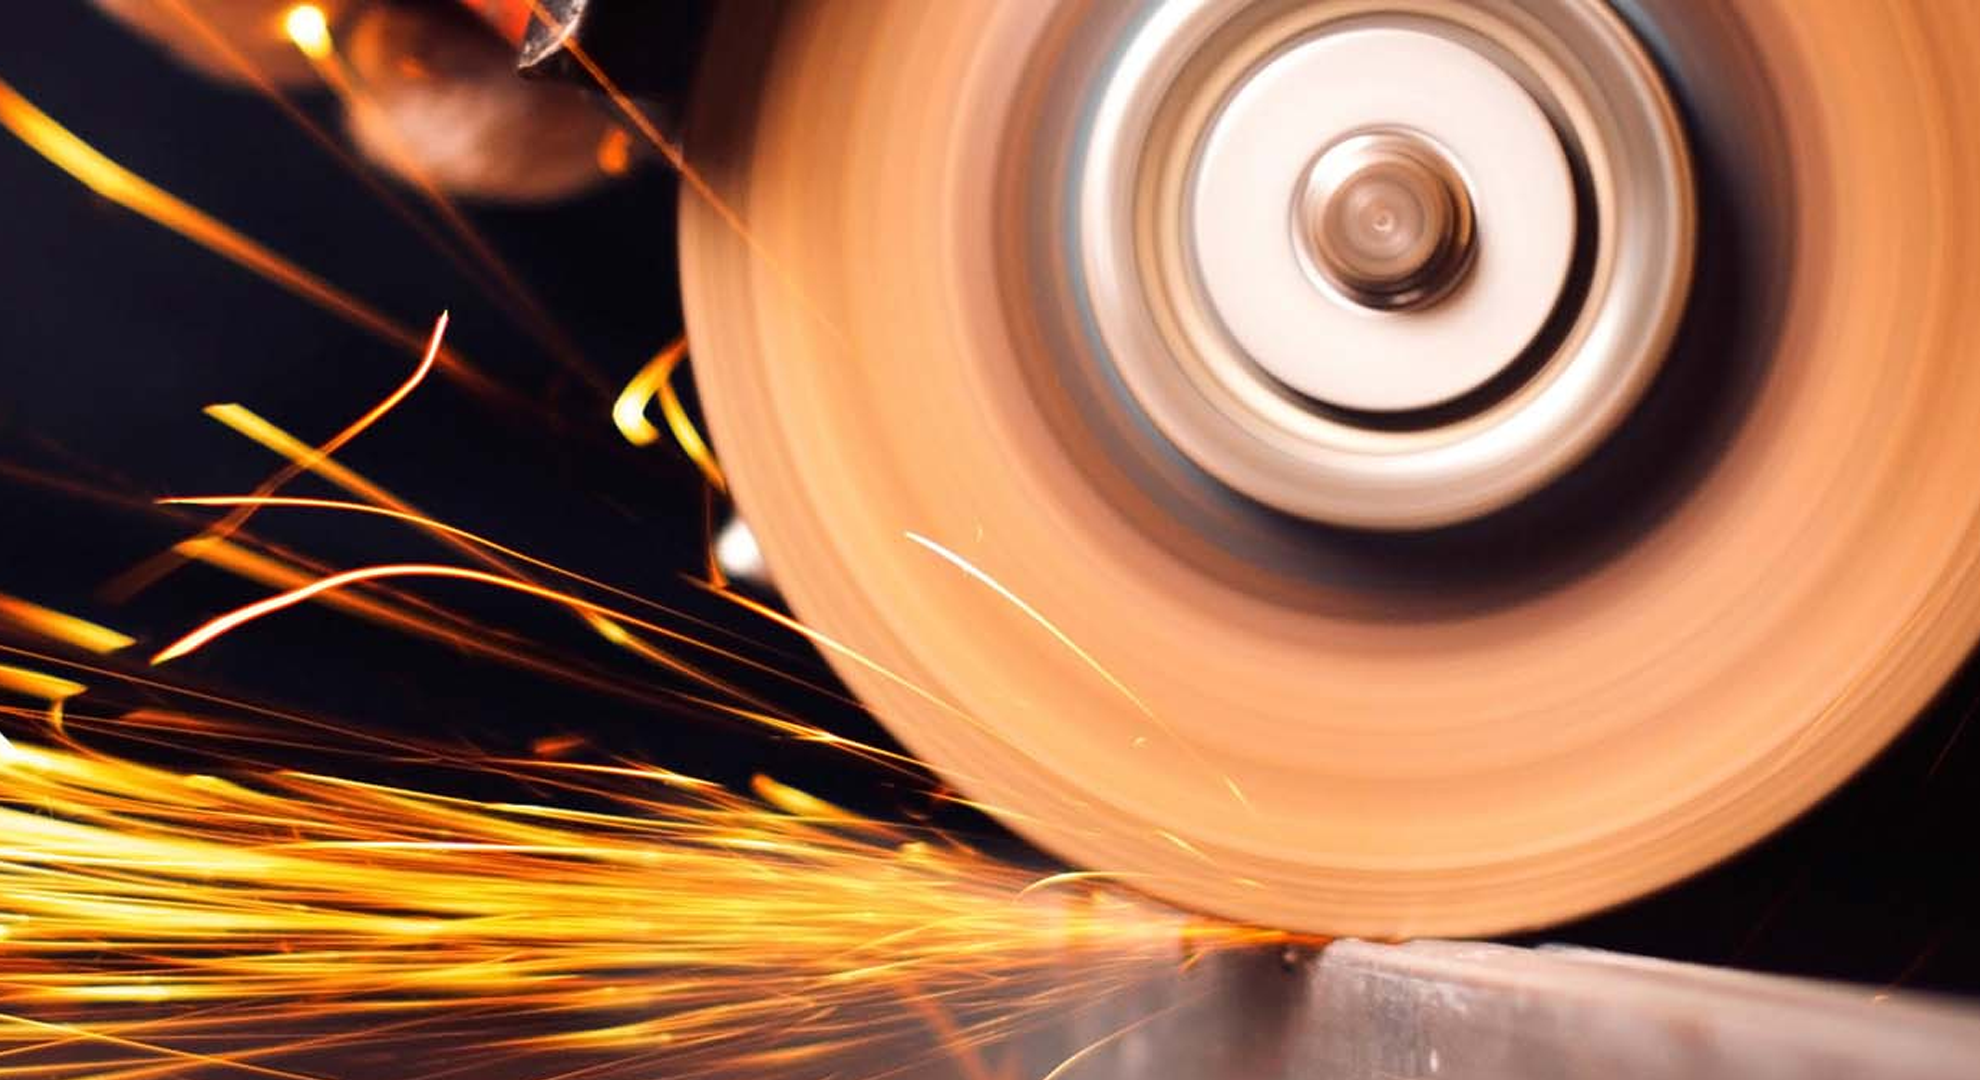 Grinder shaping metal with sparks 